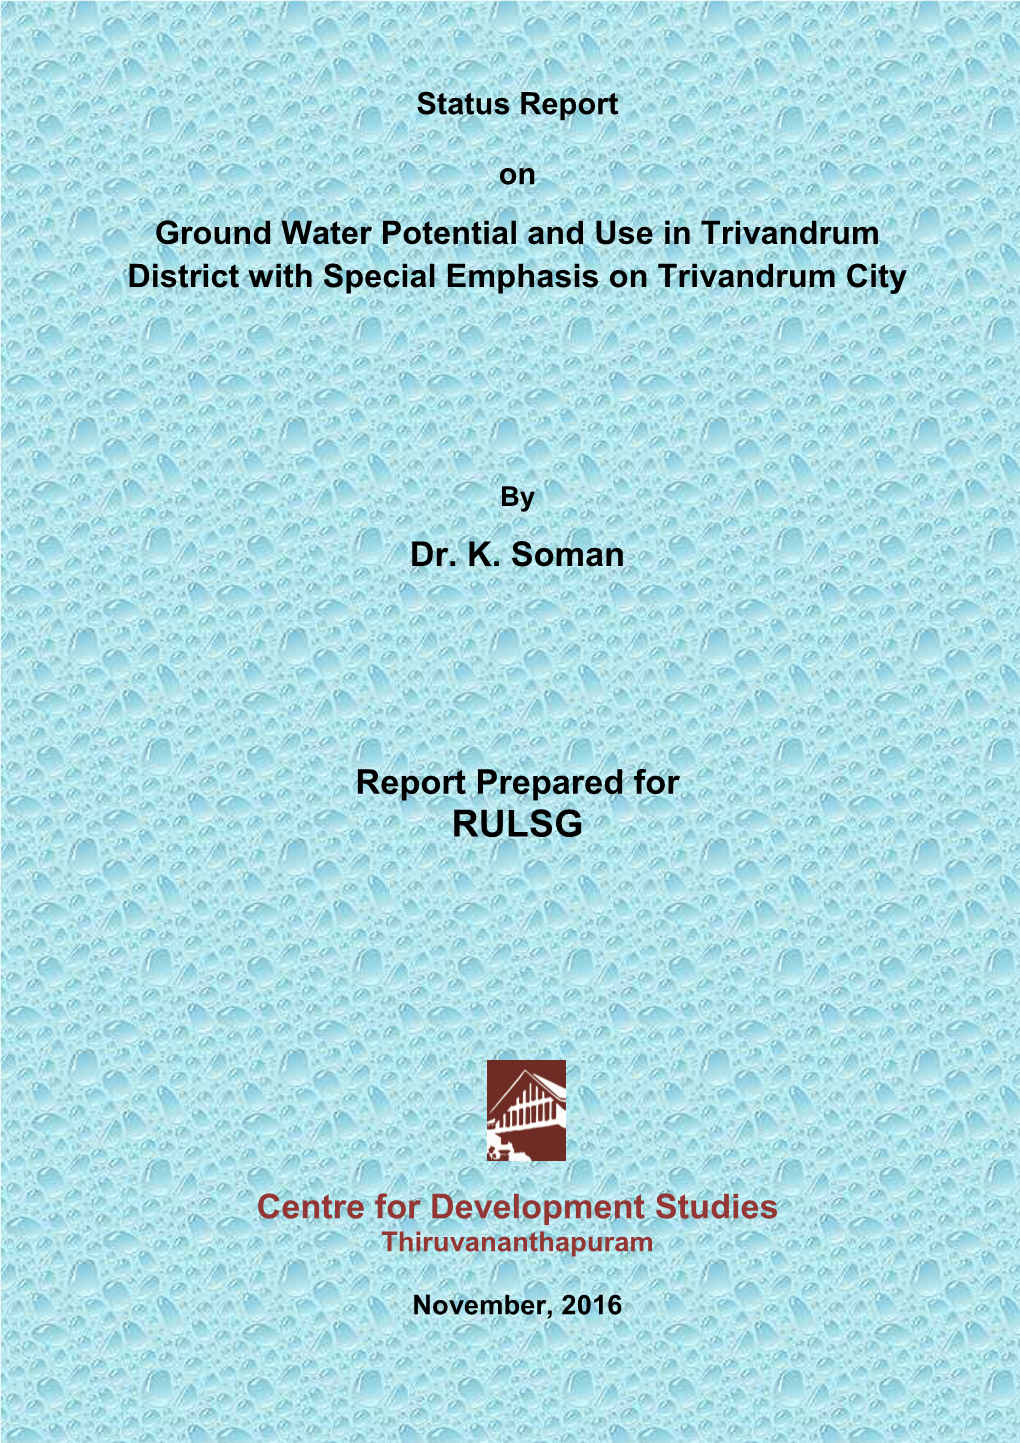 Status Report on Ground Water Potential and Use in Trivandrum District with Special Emphasis on Trivandrum City